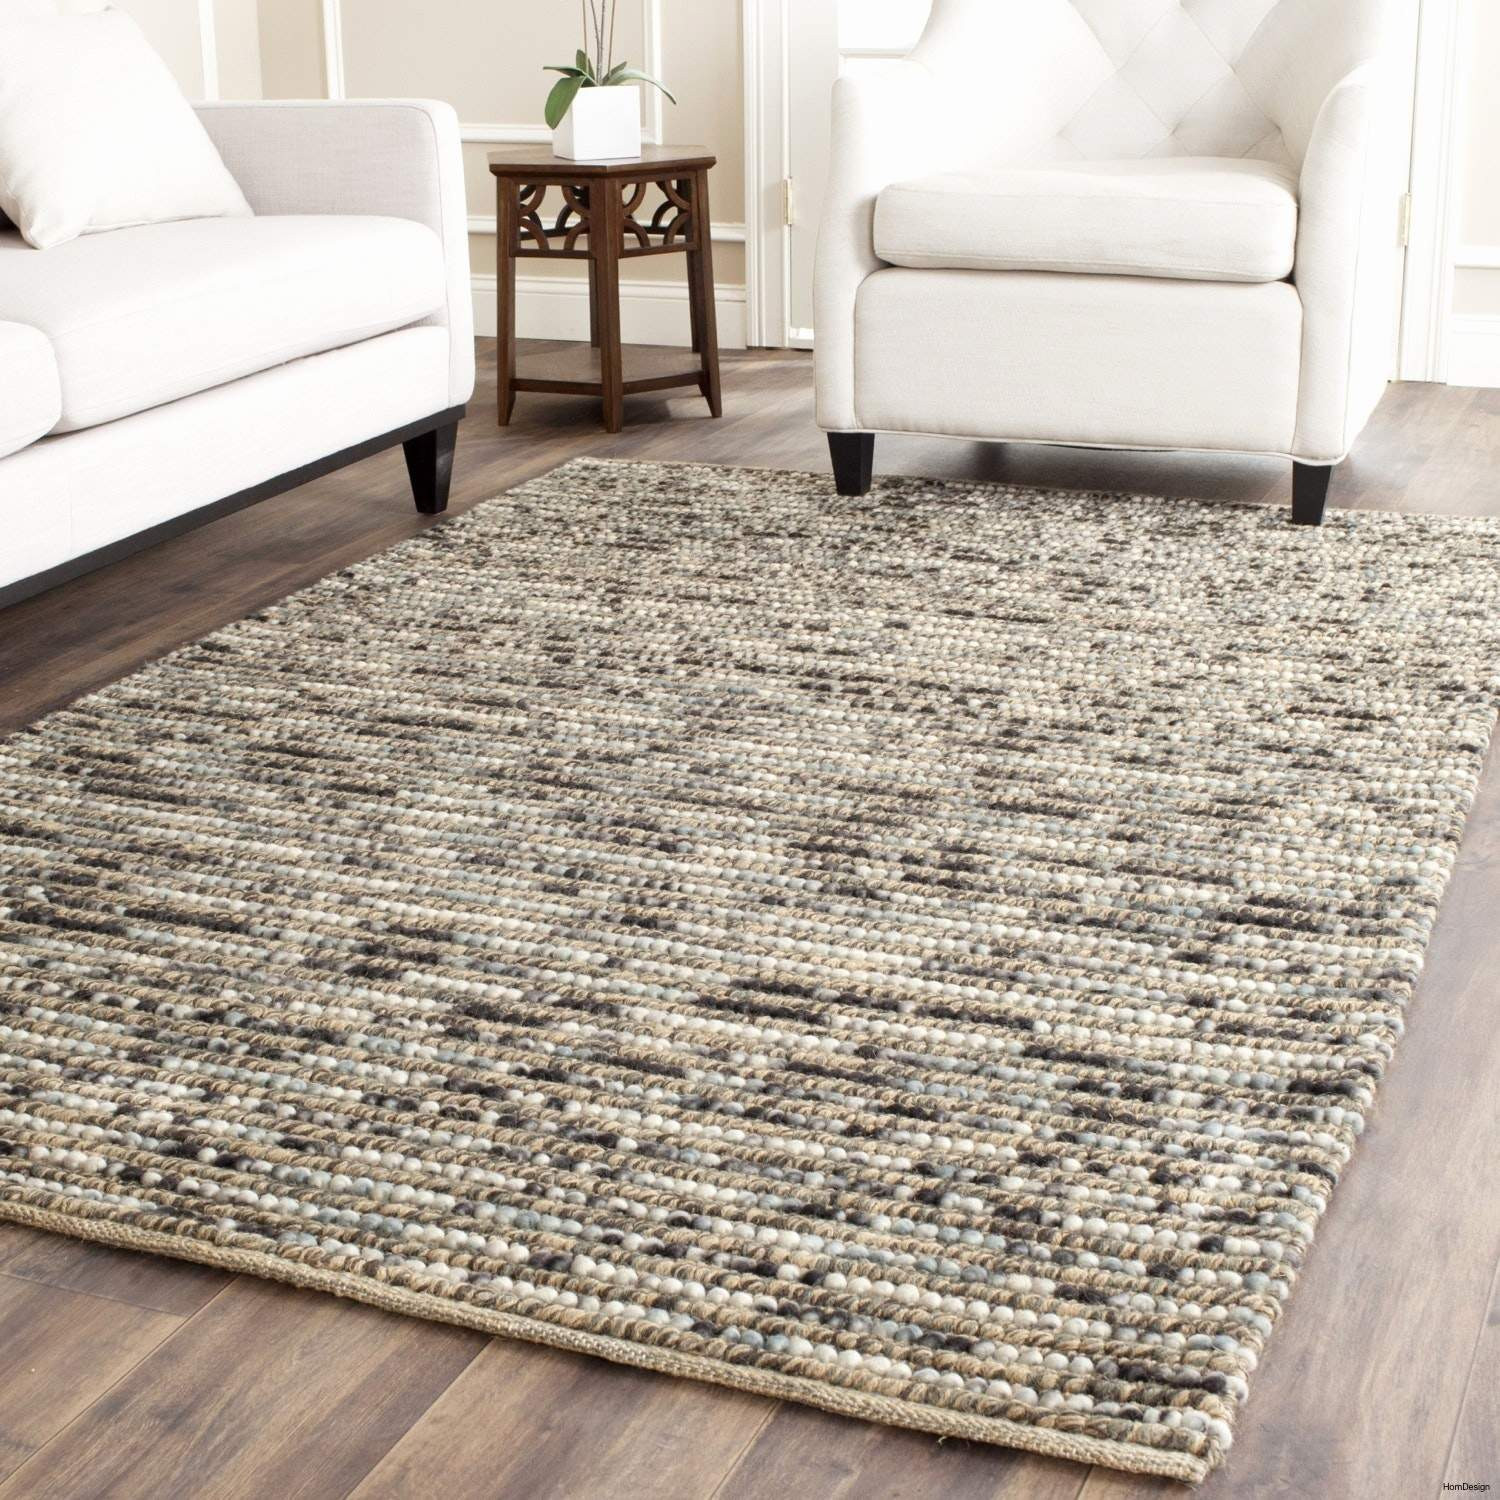 how to hardwood floor of carpets for living rooms unique area rugs for hardwood floors best inside carpets for living rooms beautiful grey and cream area rug awesome rugged new cheap area rugs